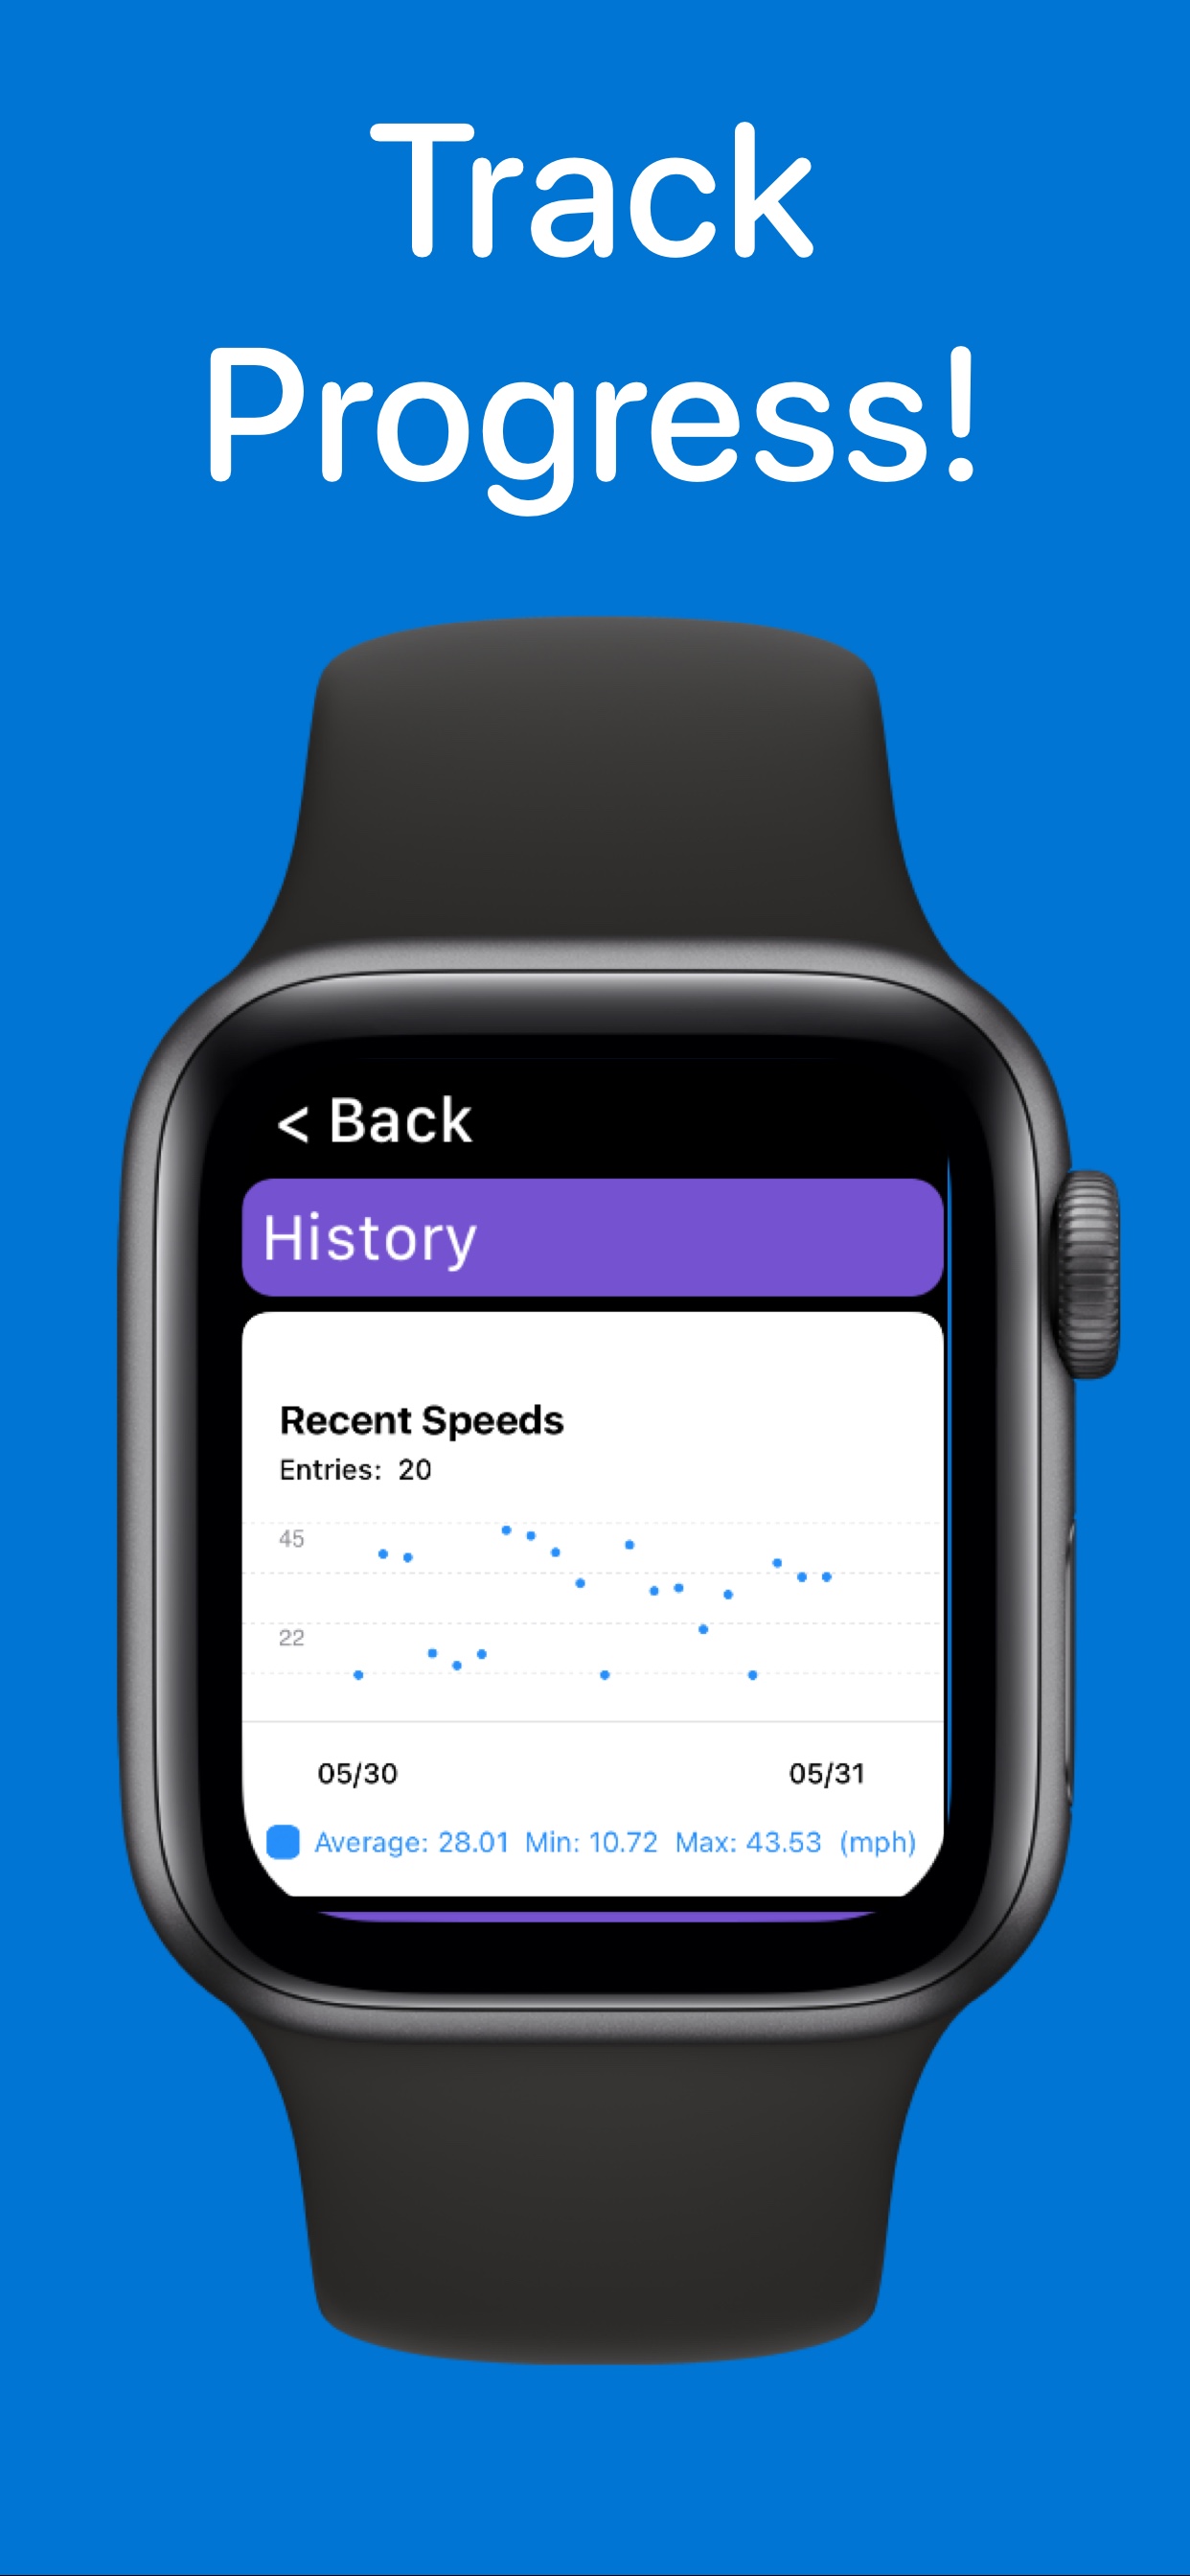 Arm Speed Analyzer keeps track of speed and acceleration so you can review history on Apple Watch